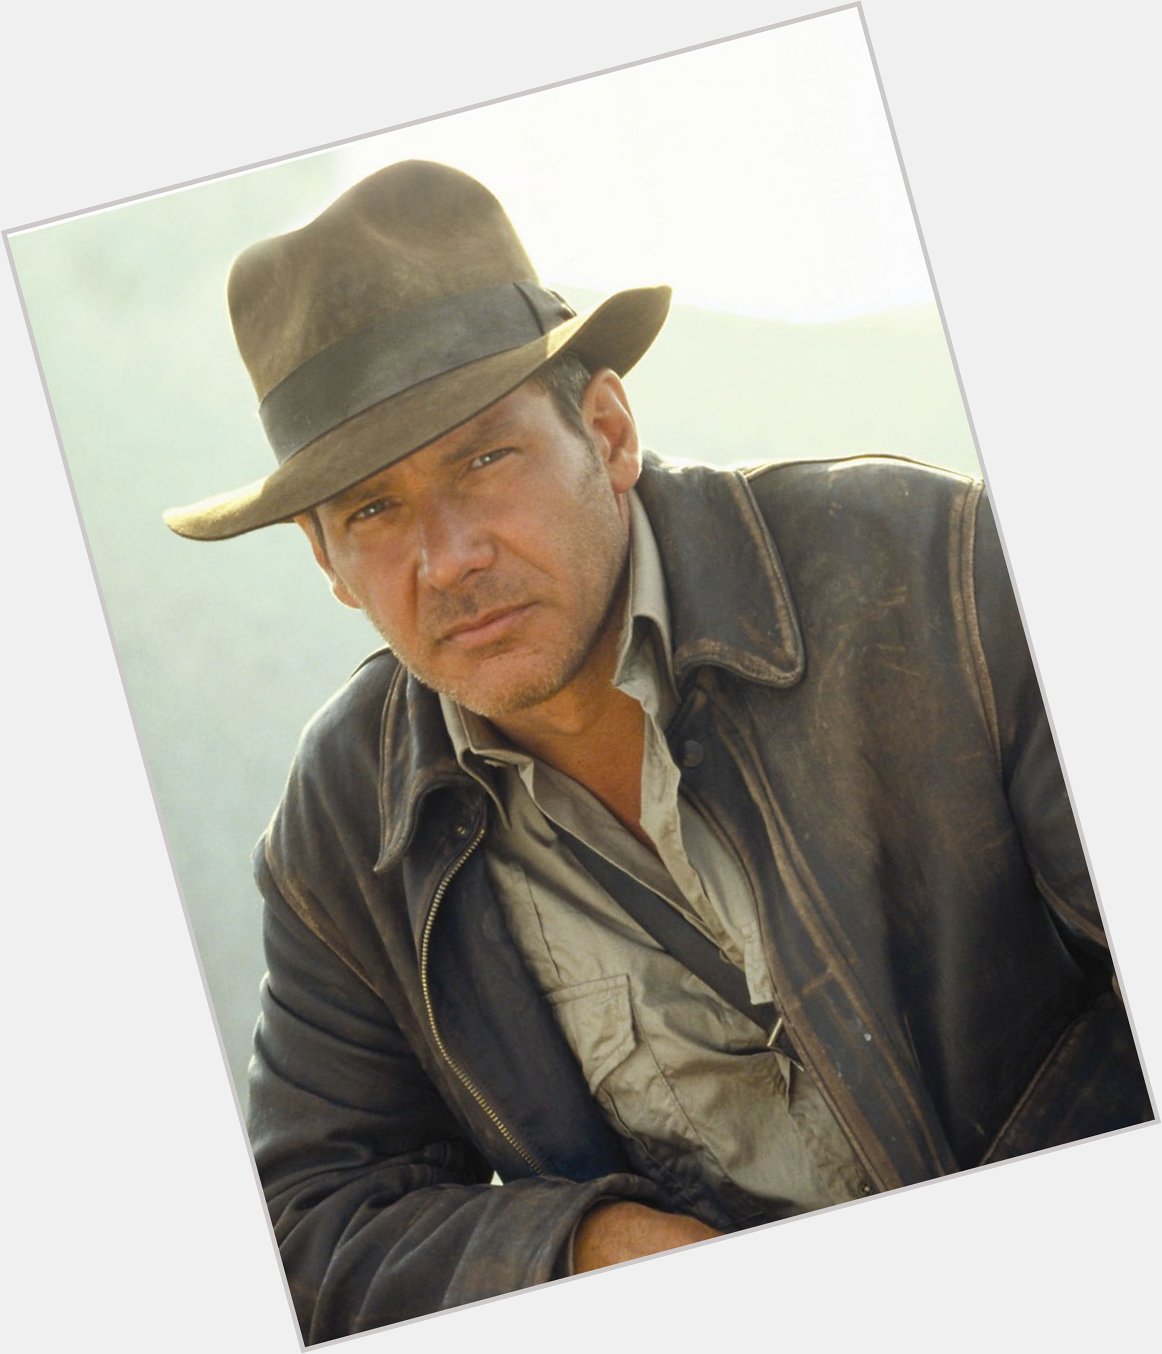 Harrison Ford ,
Happy birthday to 75 years old I will support you in the future 